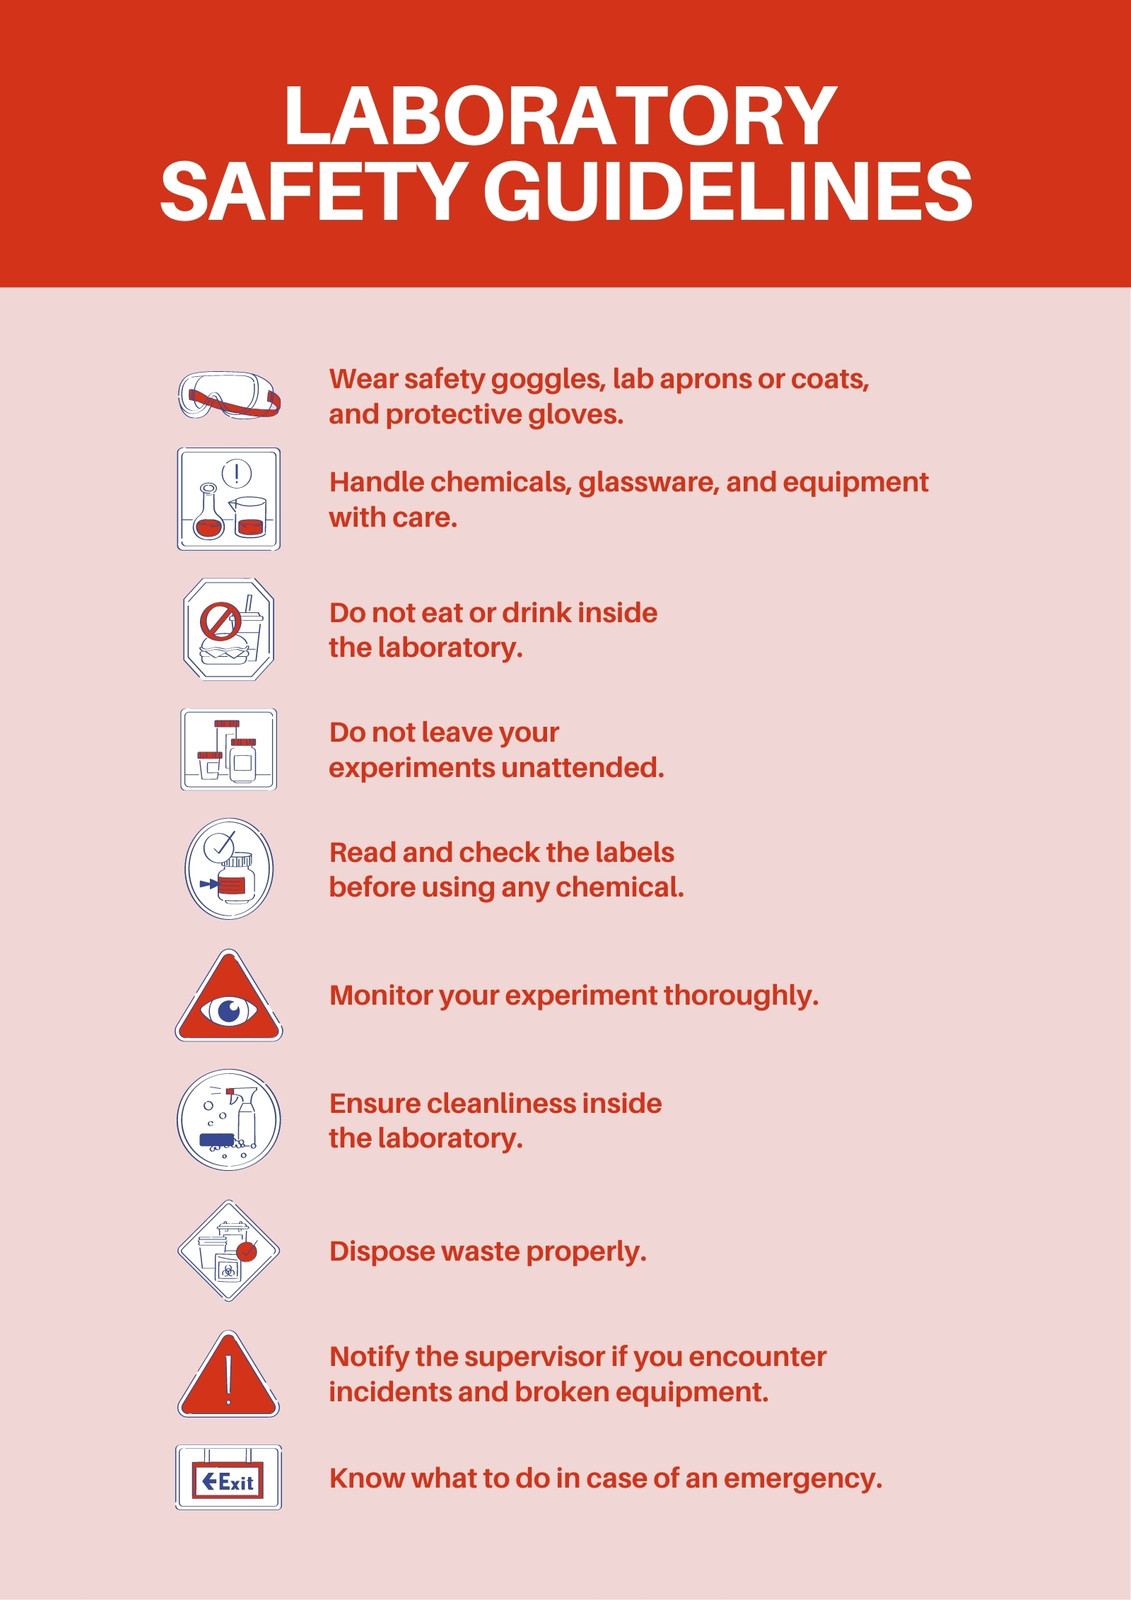 https://marketplace.canva.com/EAFfvz7LRqE/1/0/1131w/canva-lab-safety-poster-in-light-pink-red-informational-illustrative-style-OK0cL7sHceo.jpg